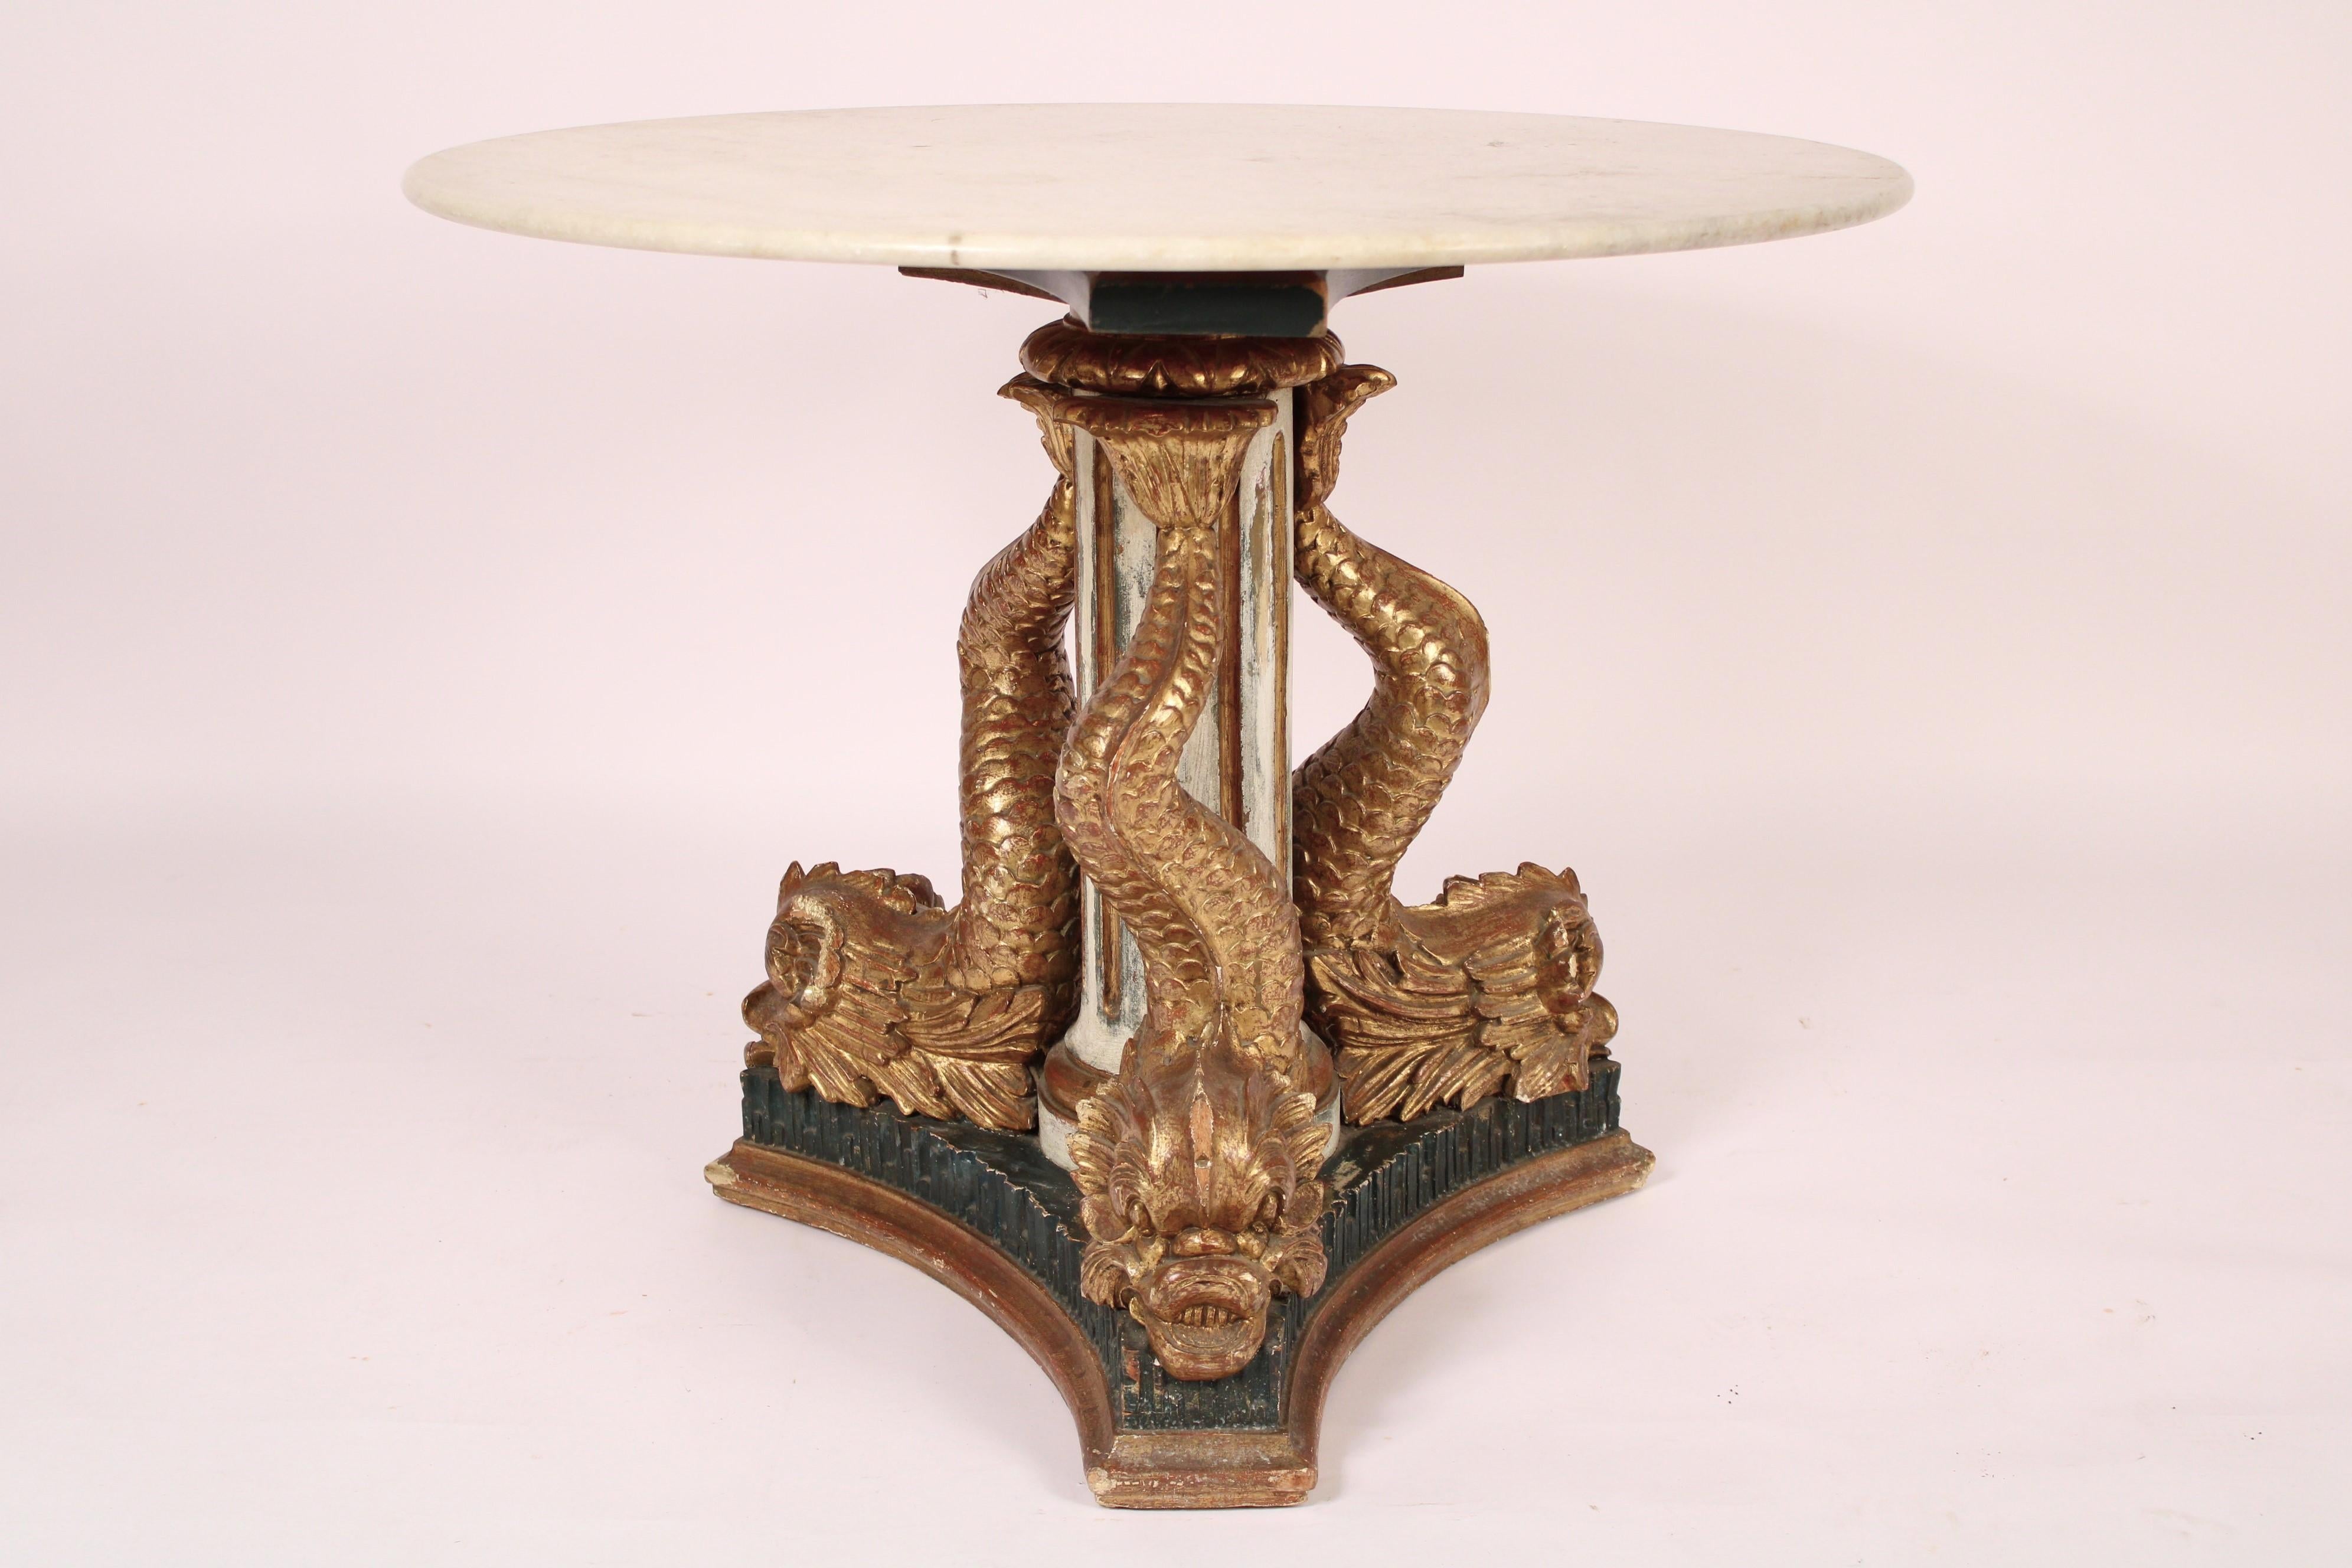 Antique Empire style gilt wood center table with marble top, 19th century. With a round white marble top resting on a painted and fluted column with 3 gilt wood dolphins, resting on a painted and gilded platform base. Could be used either as a